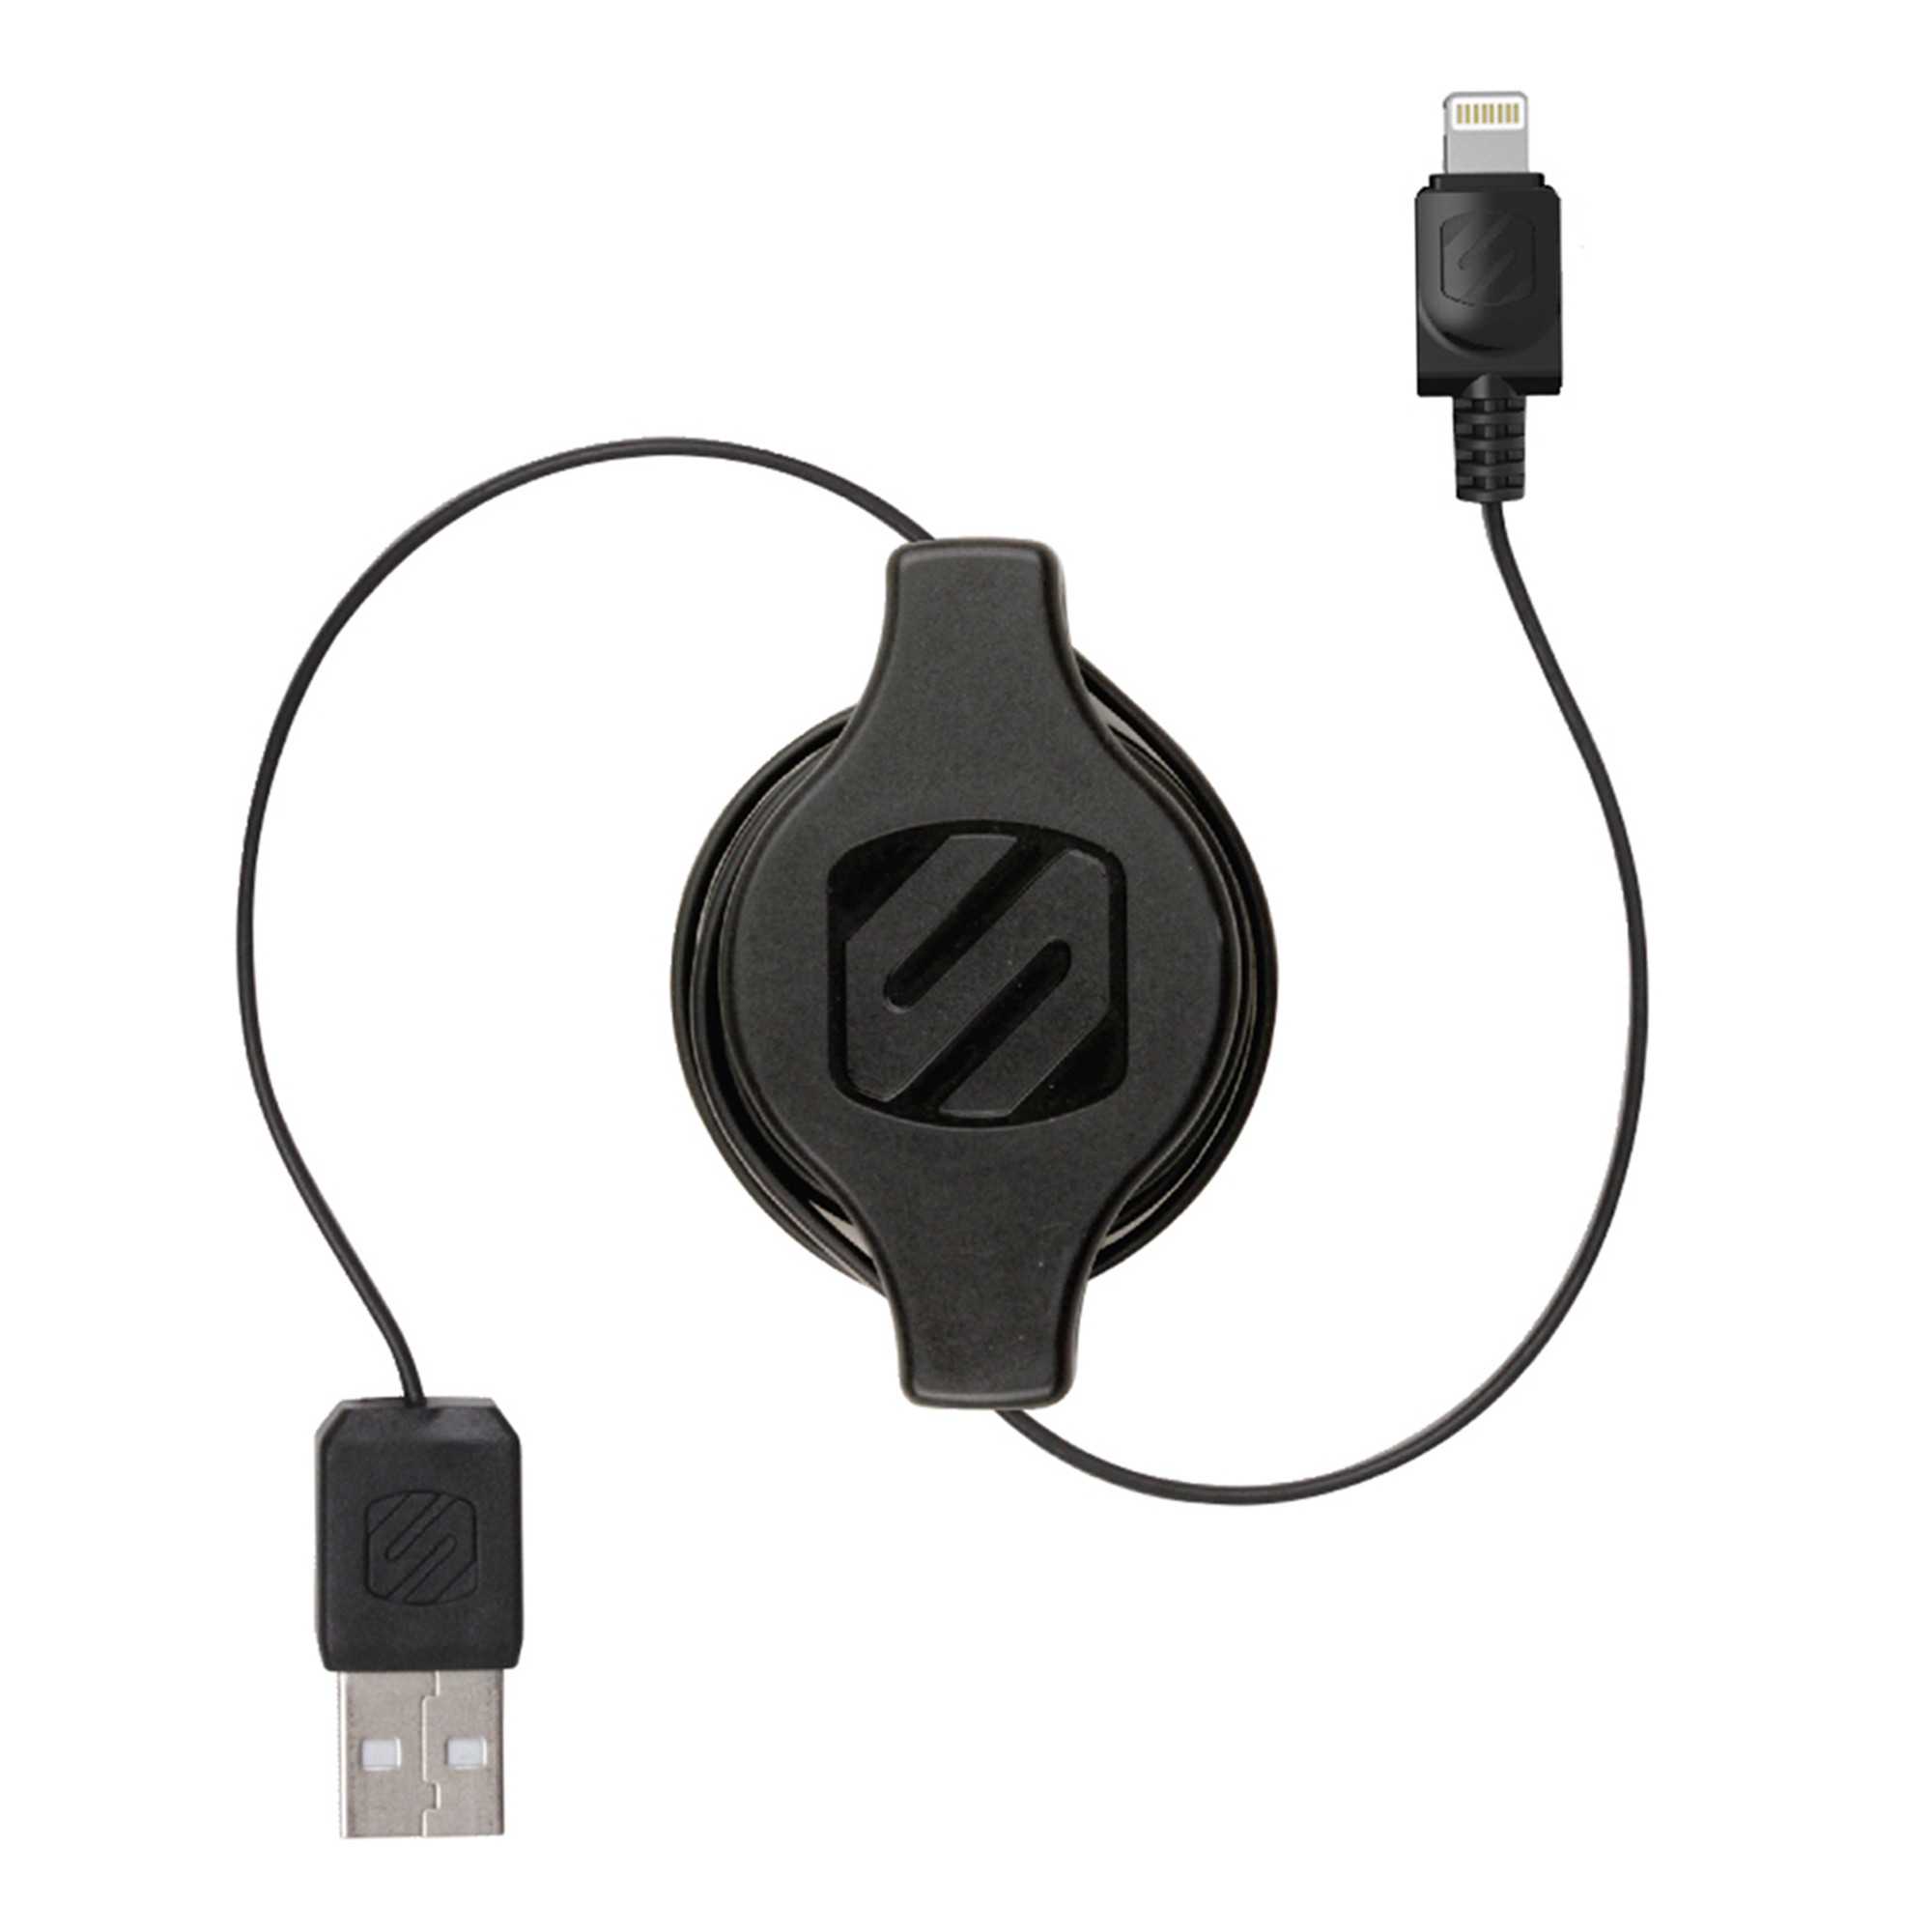 Scosche Lightning USB Cable, Retractable Lightning Cable